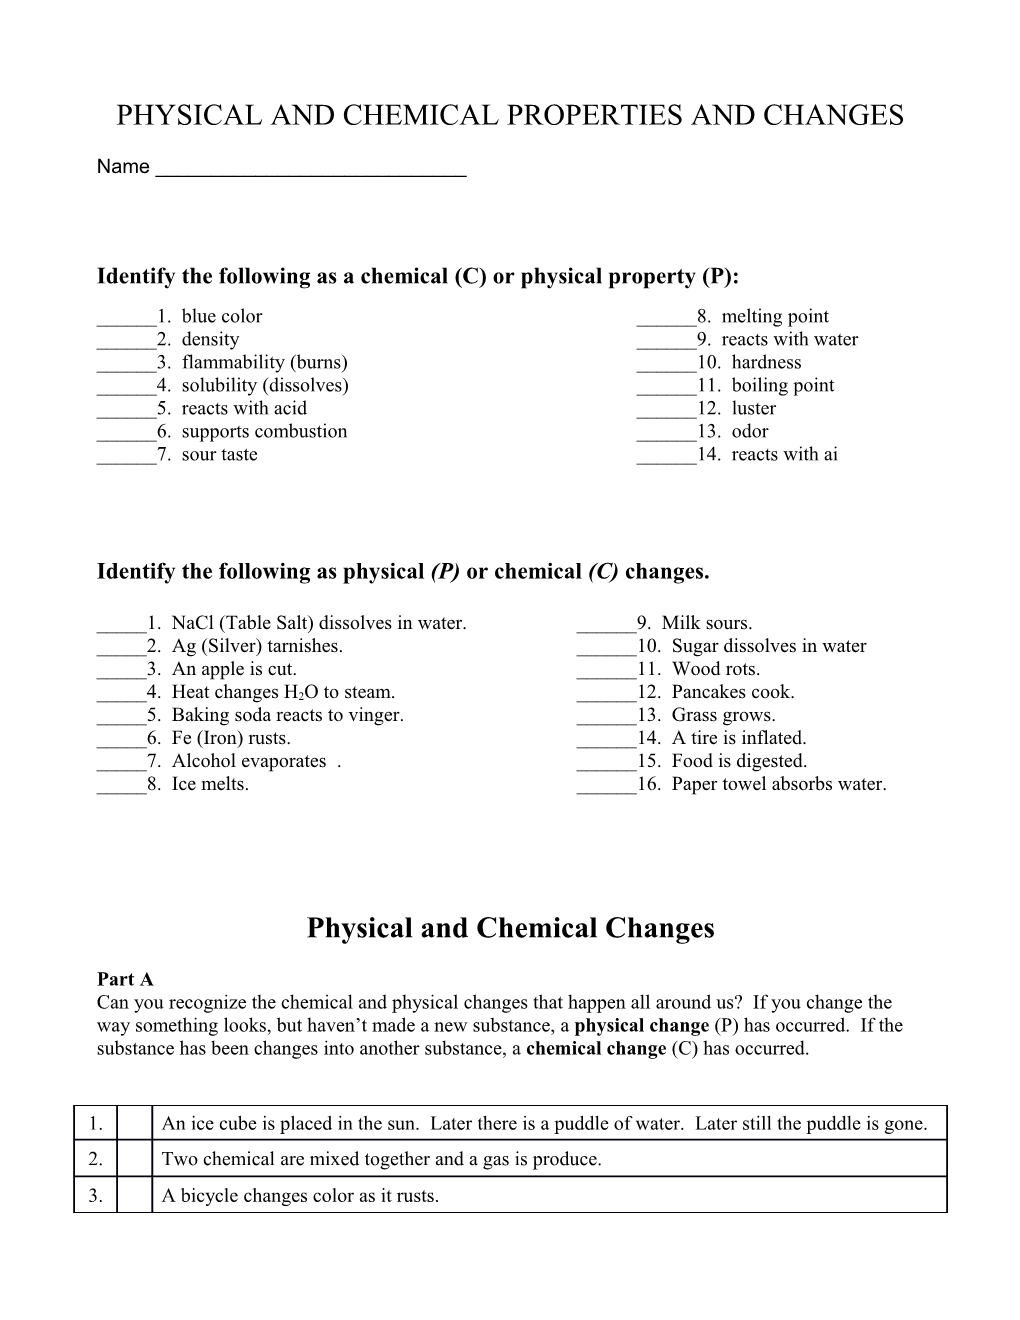 Physical and Chemical Properties and Changes s1